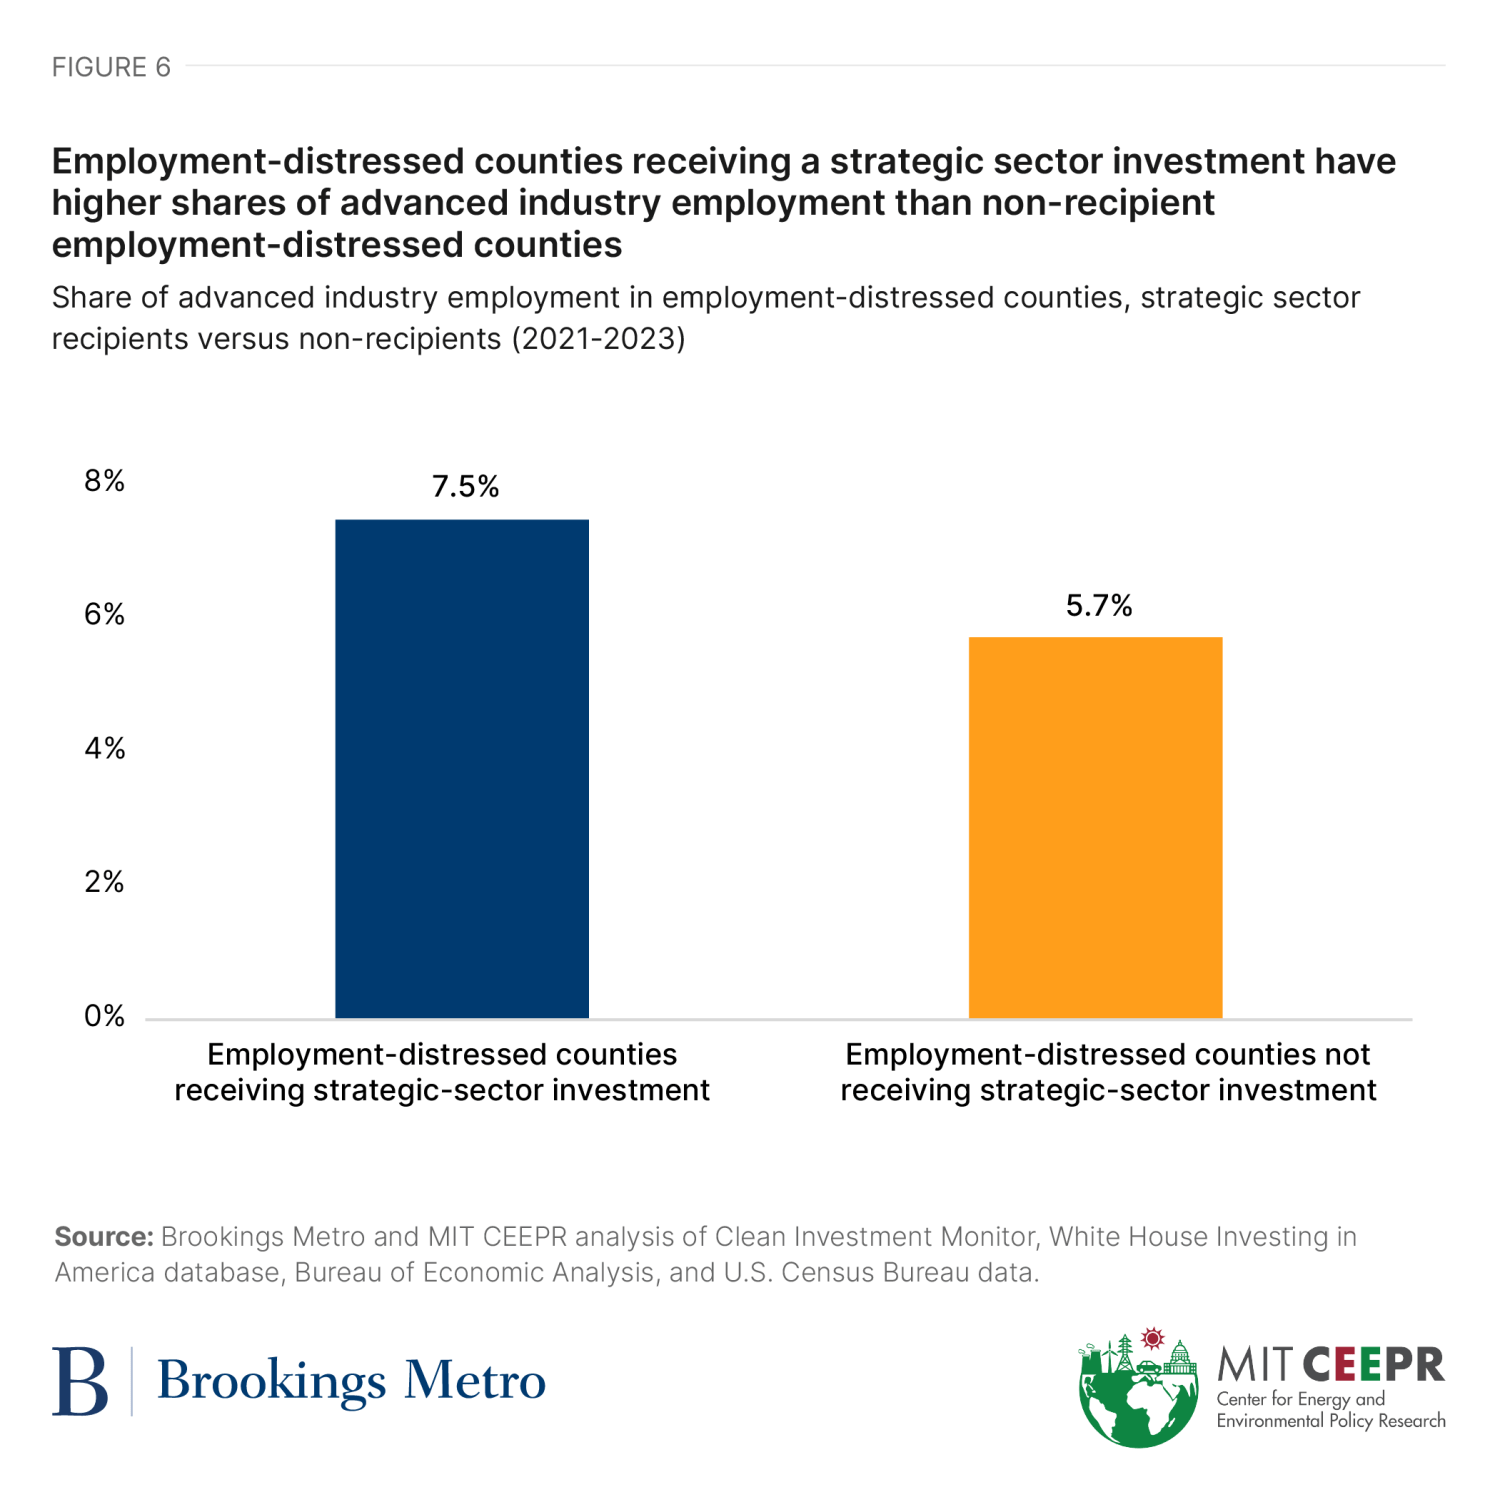 Figure 6: Employment-distressed counties receiving a strategic sector investment have higher shares of advanced industry employment than non-recipient employment-distressed counties